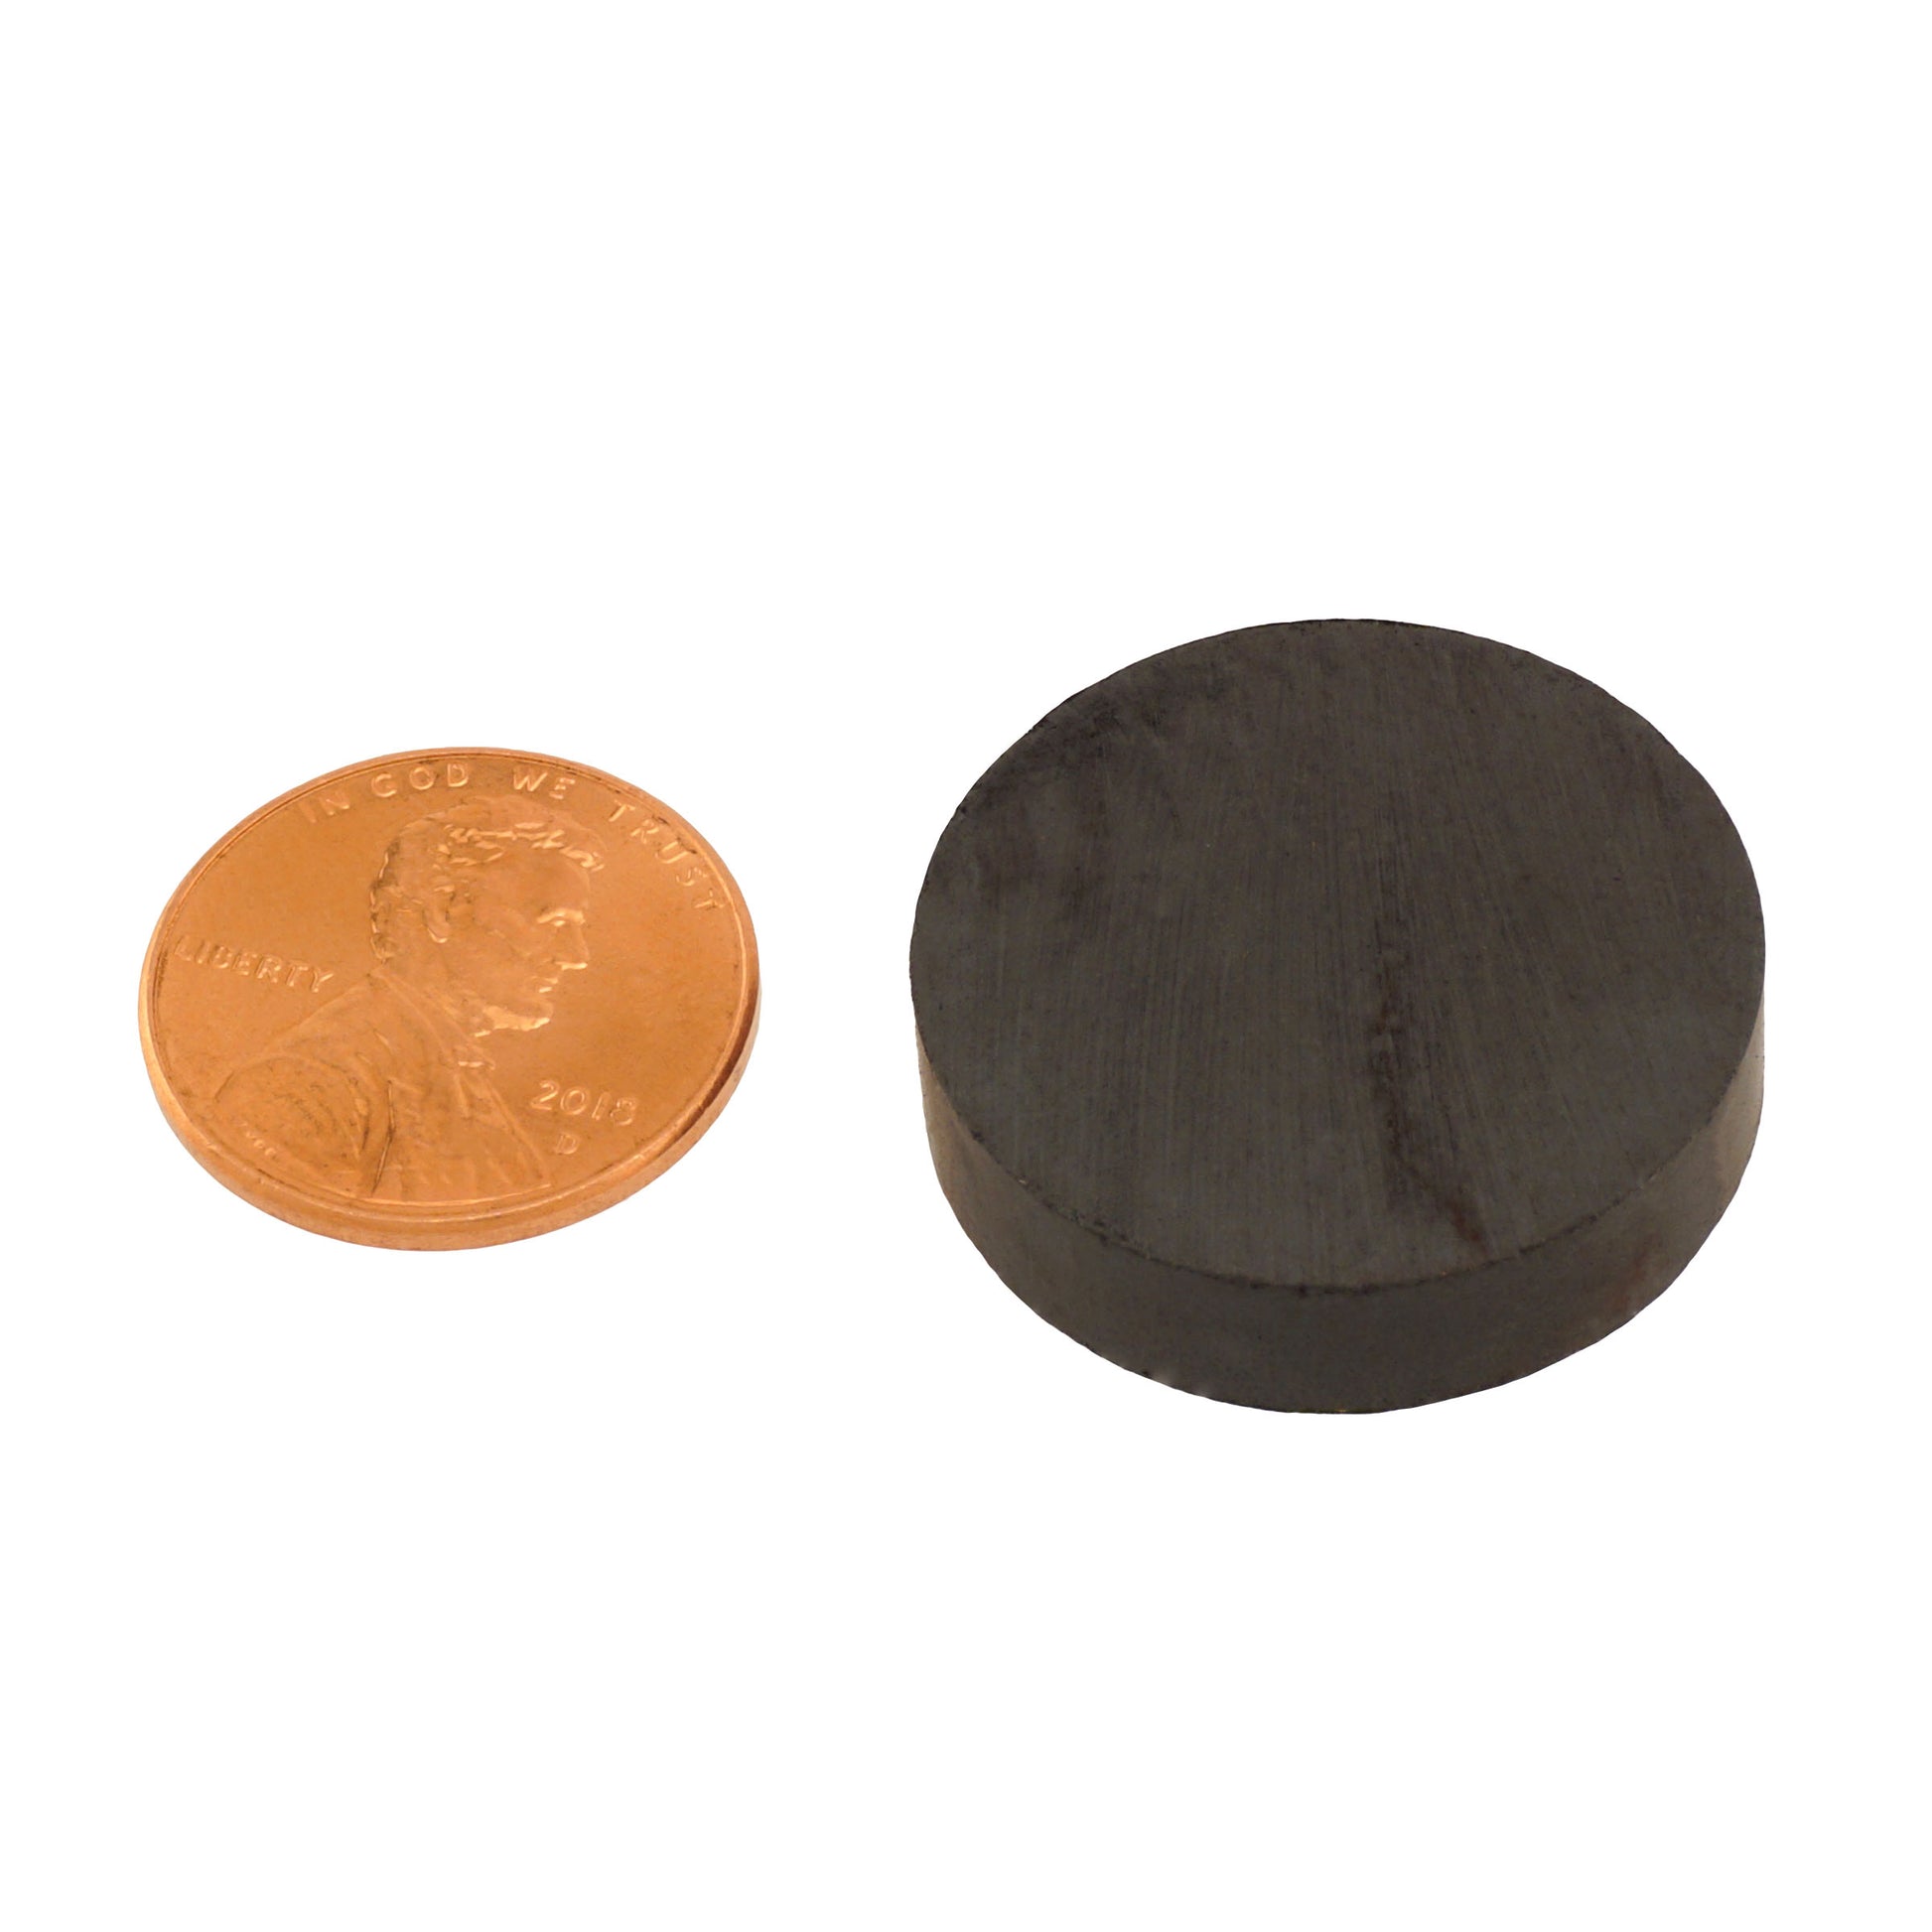 Load image into Gallery viewer, CD010002 Ceramic Disc Magnet - Compared to Penny for Size Reference